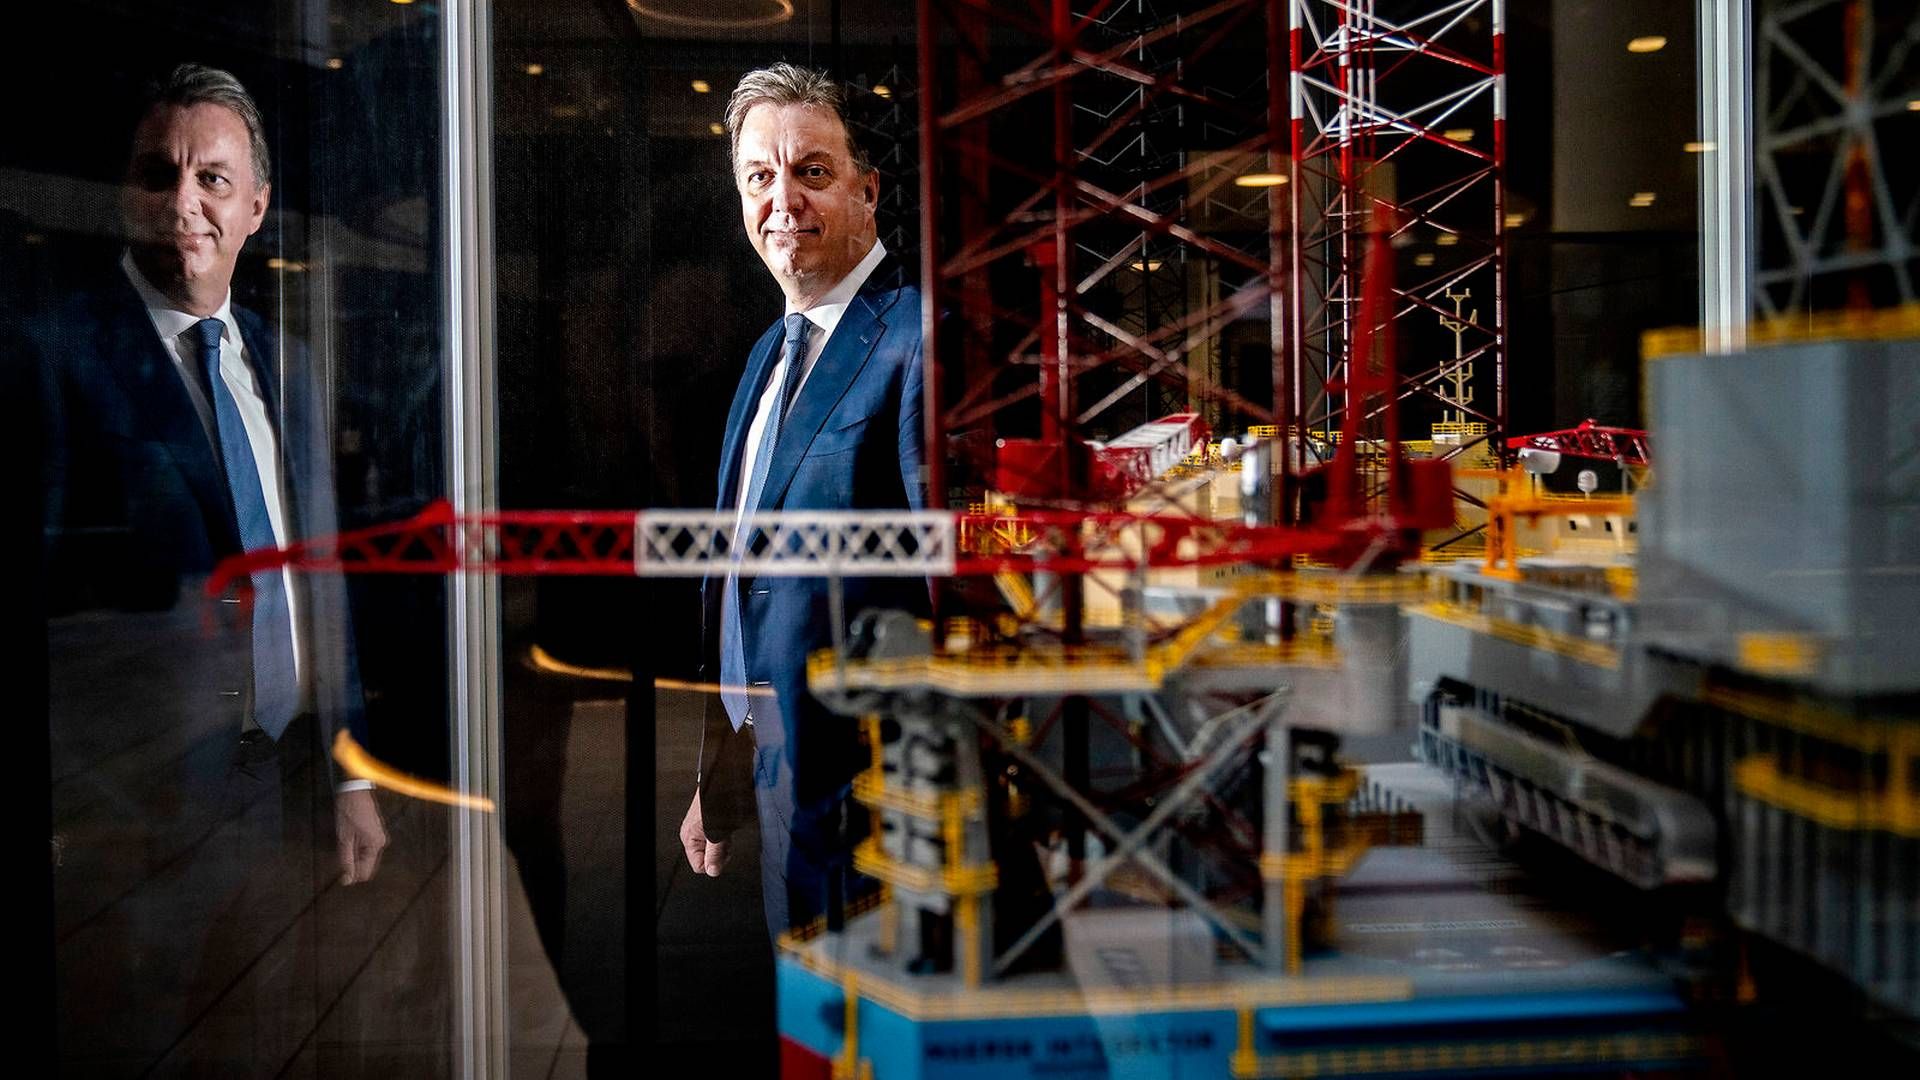 Maersk Drilling CEO Jørn Madsen will step down as soon as the upcoming merger with Noble is complete. | Photo: Stine Bidstrup/Ritzau Scanpix